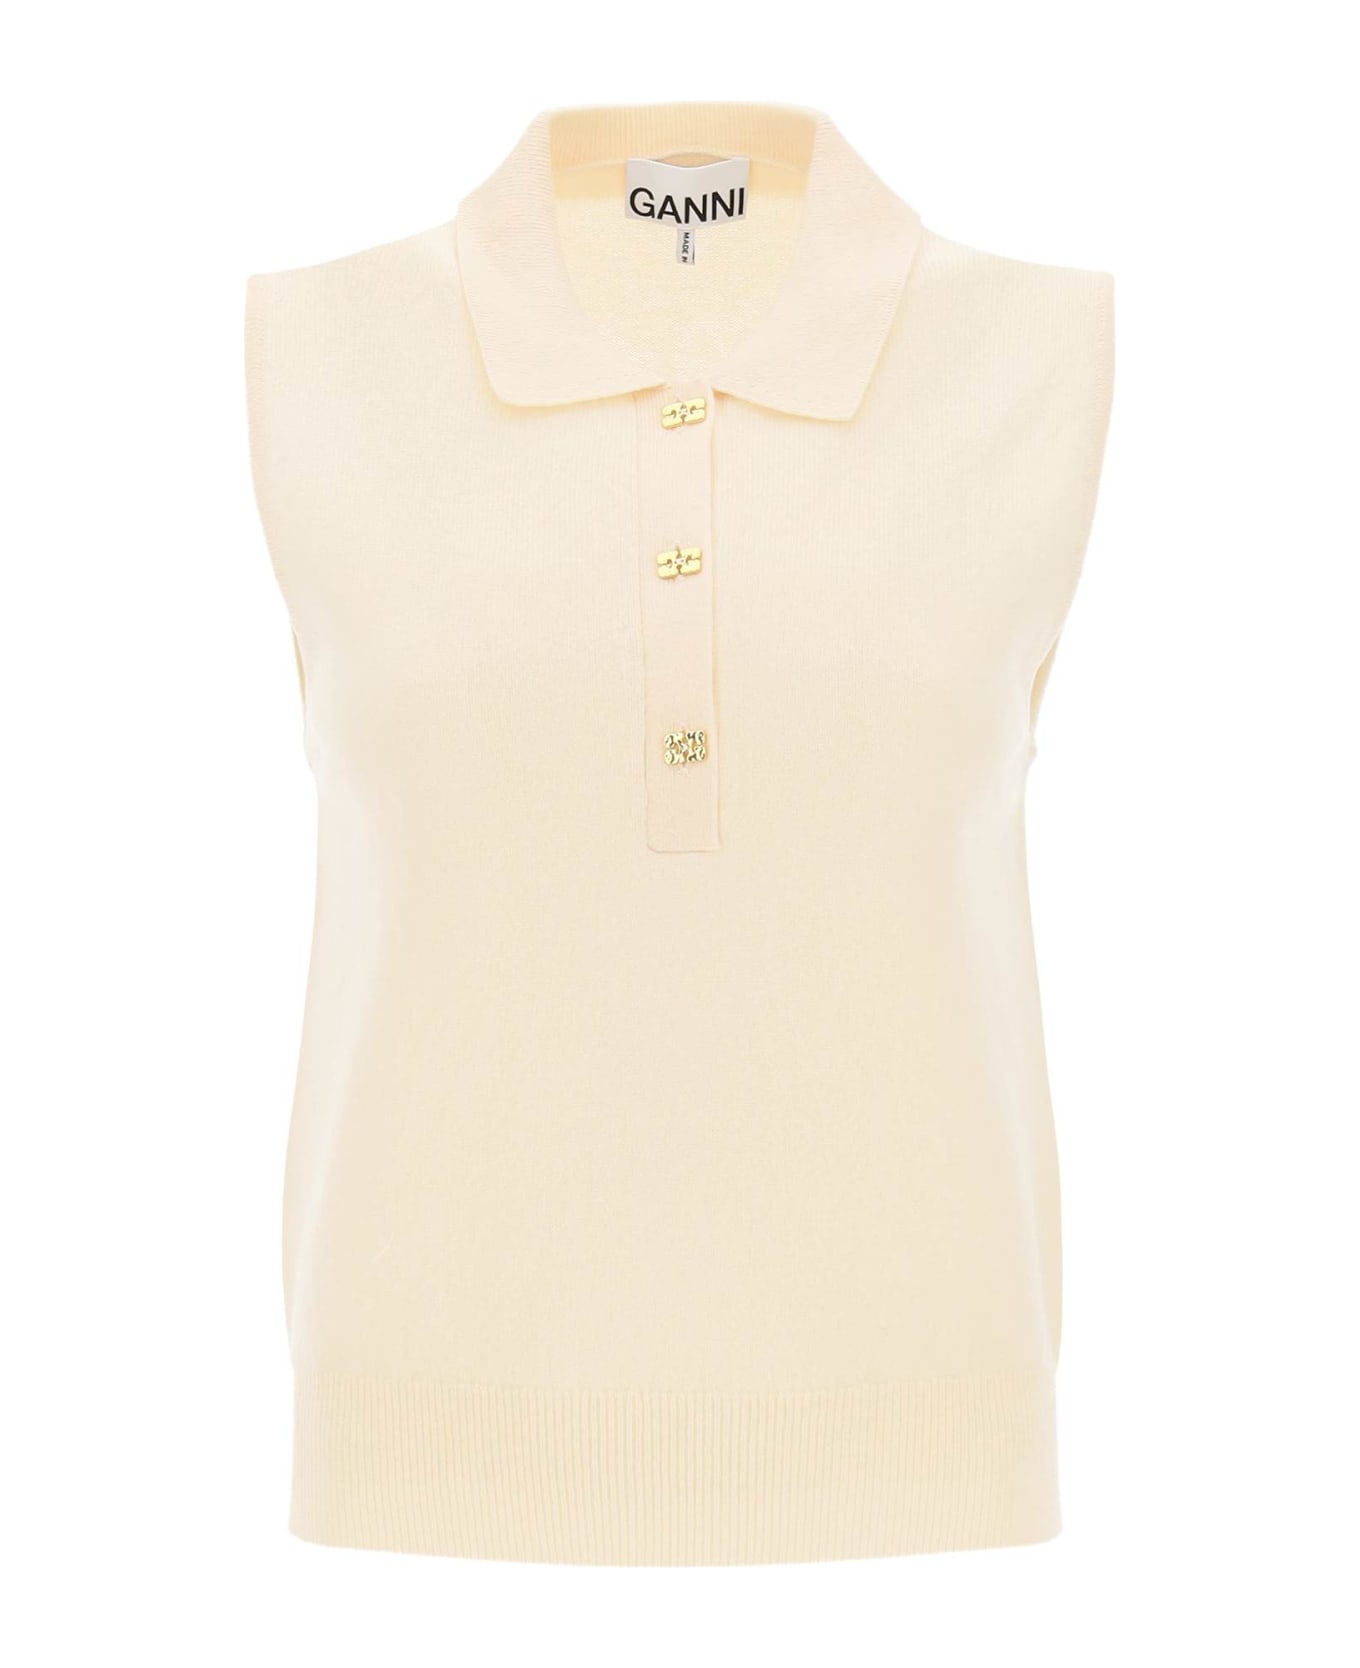 Ganni Sleeveless Polo Shirt In Wool And Cashmere - ALABASTER GLEAM (Beige) ポロシャツ